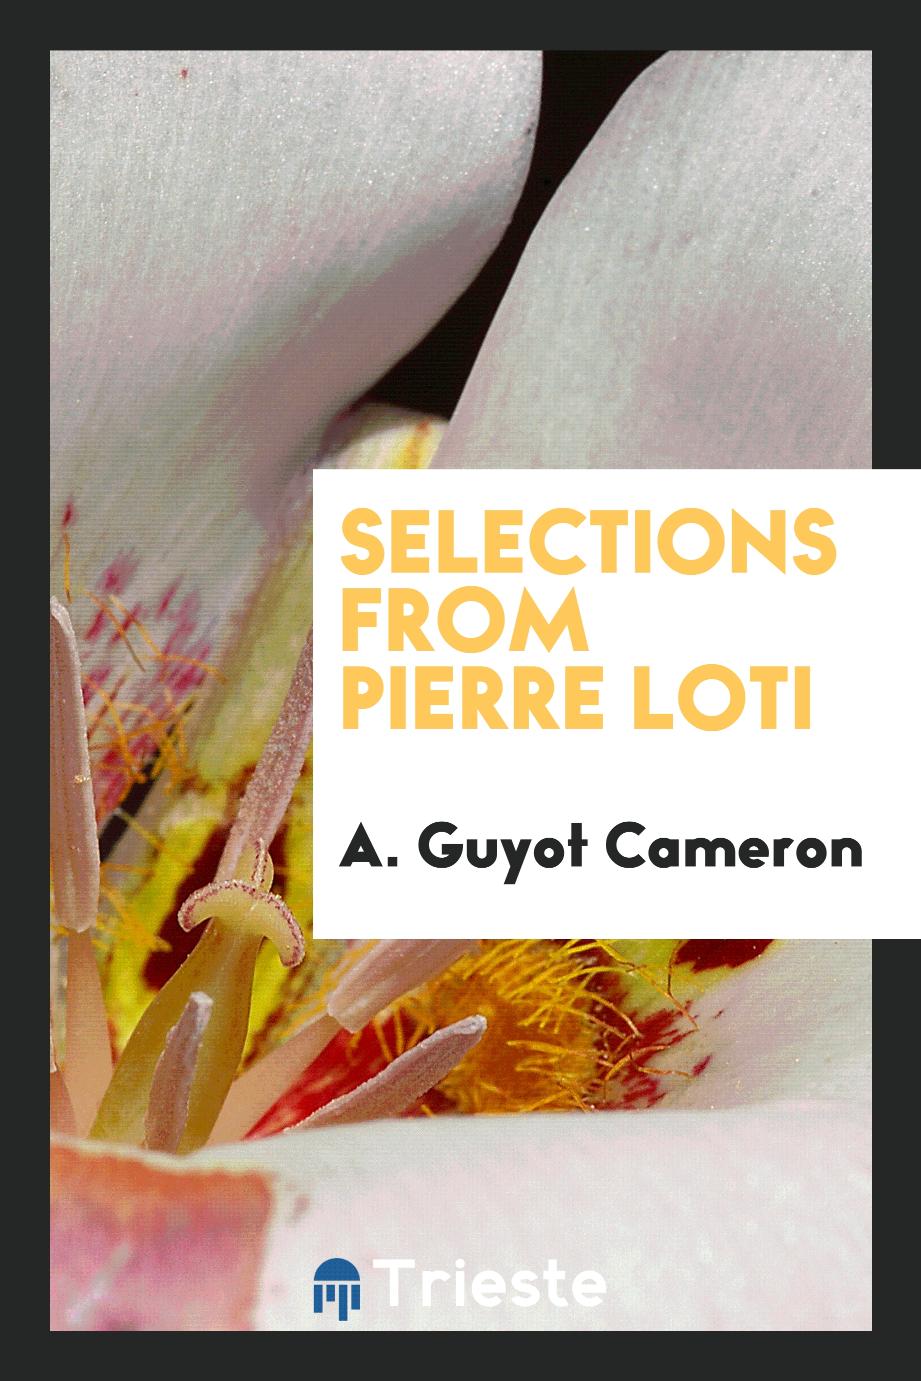 Selections from Pierre Loti